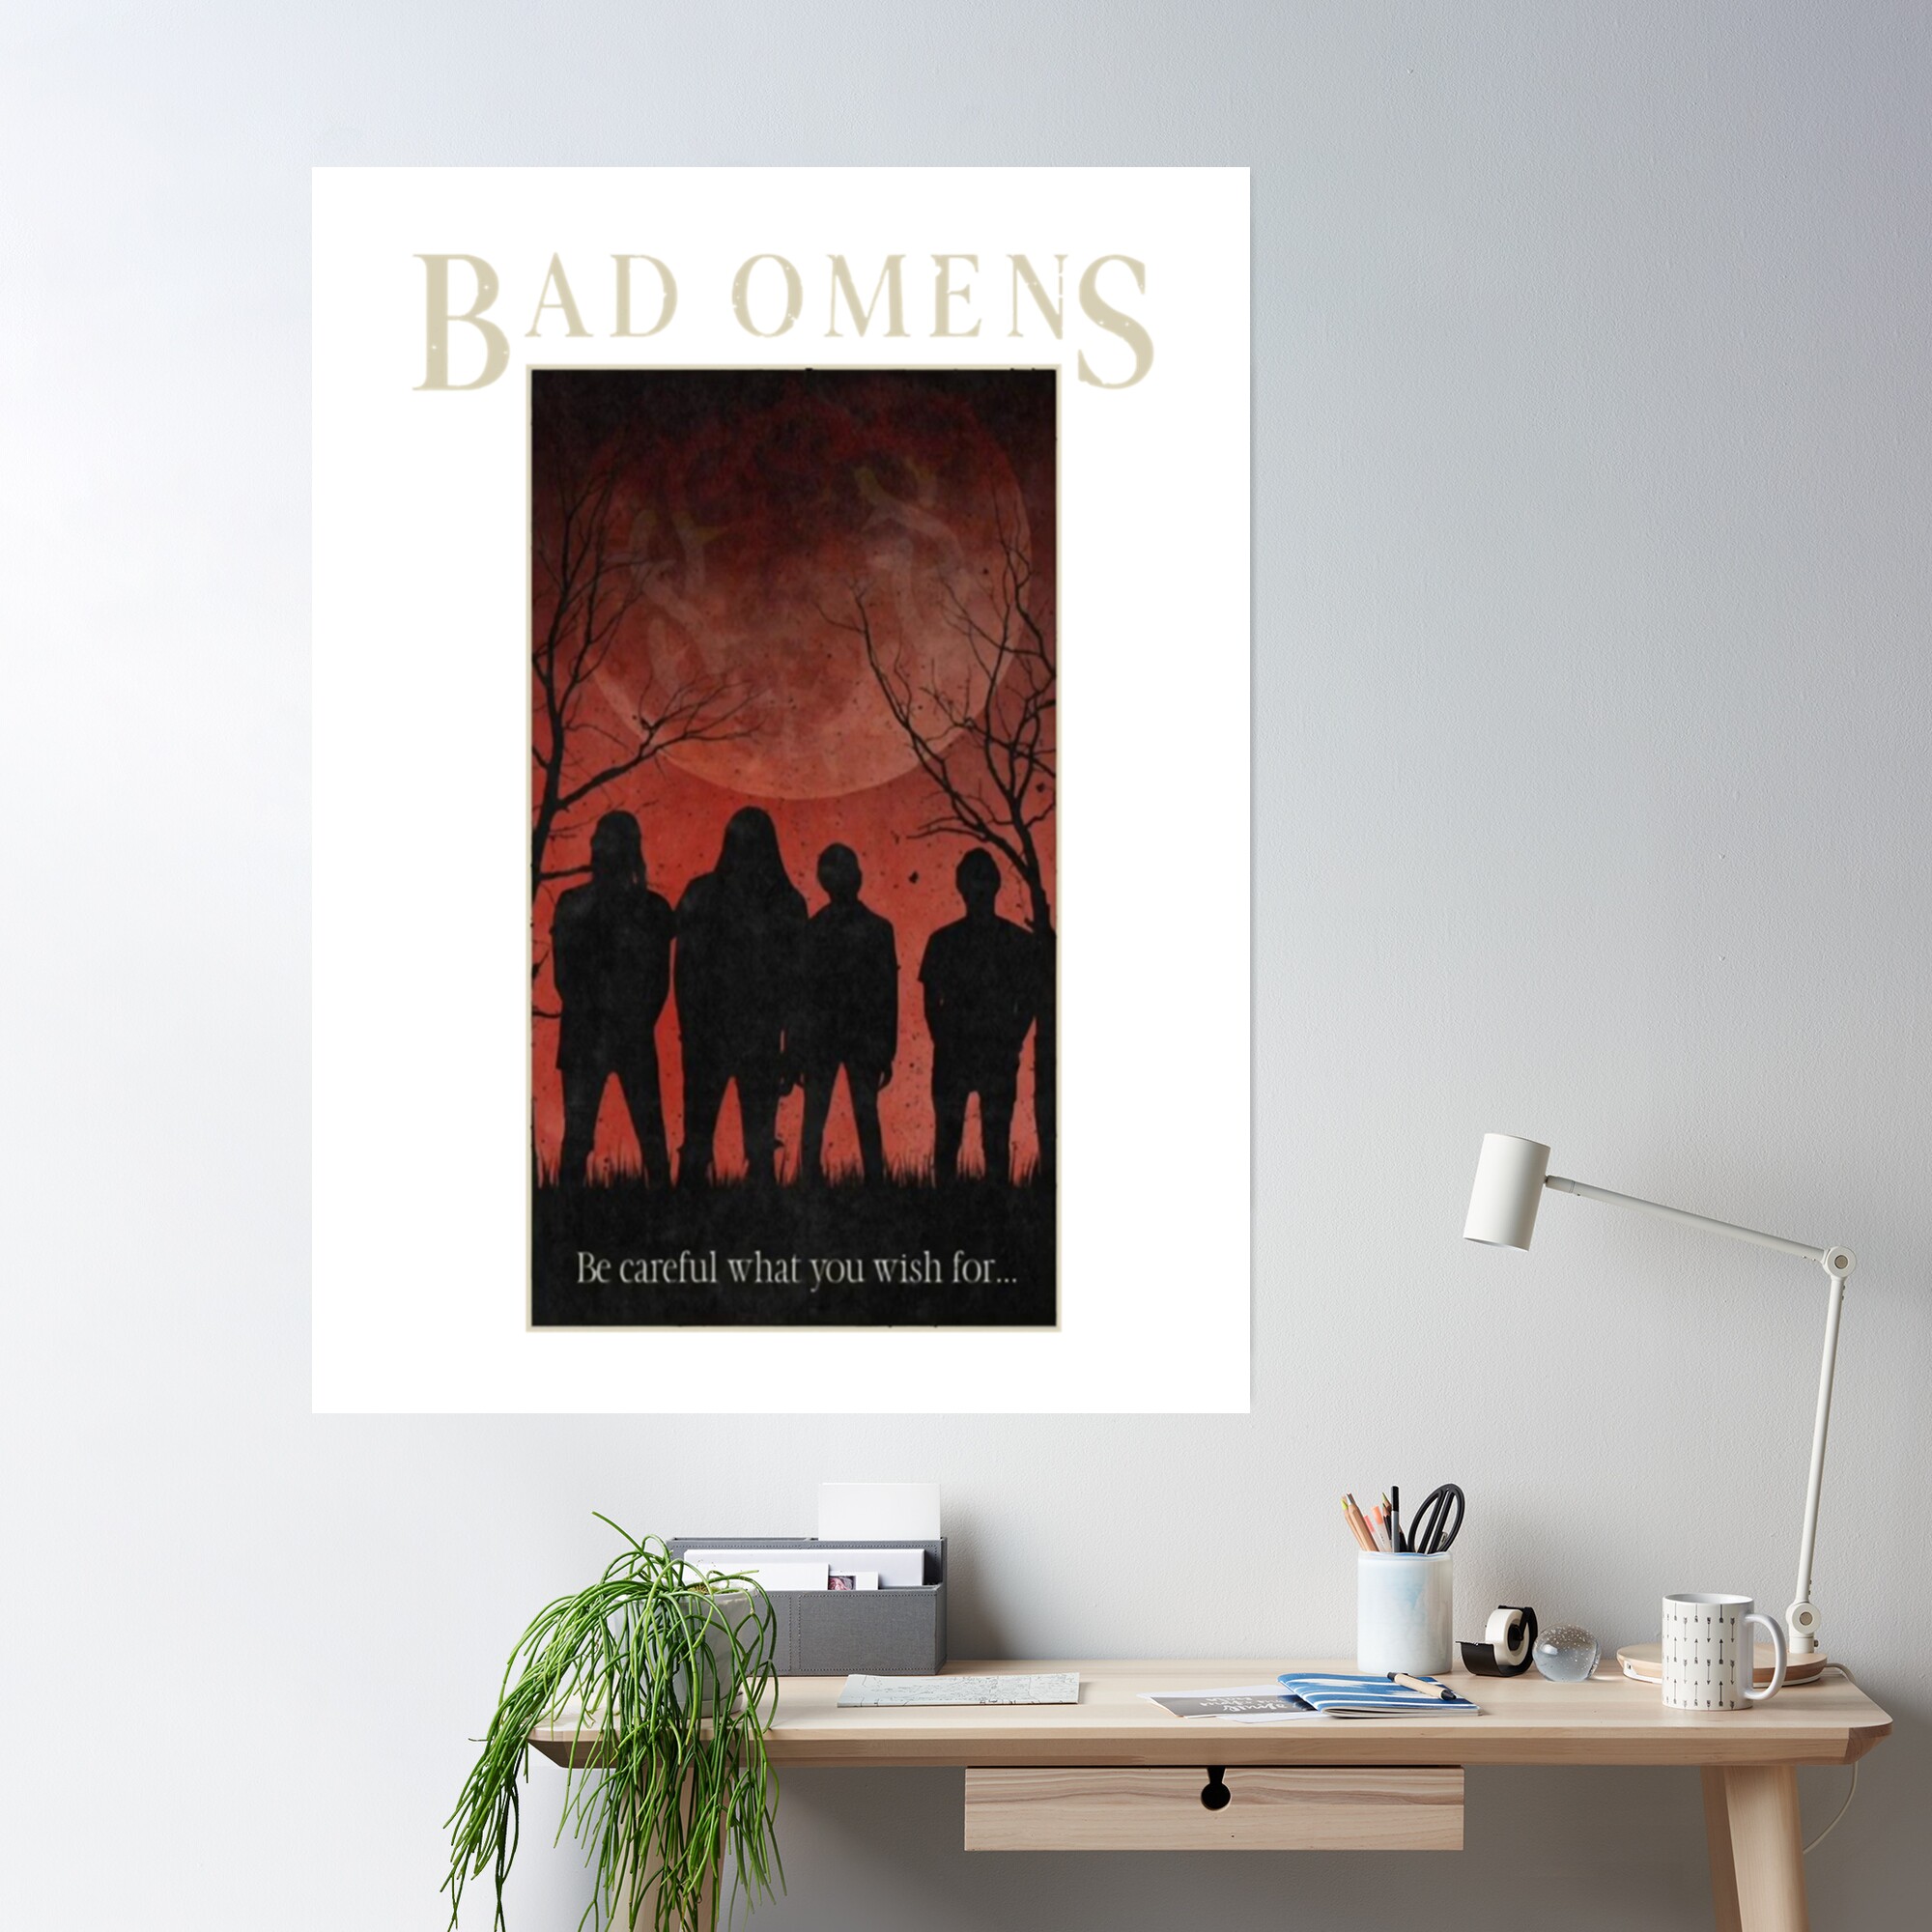 cposterlargesquare product2000x2000 15 - Bad Omens Shop